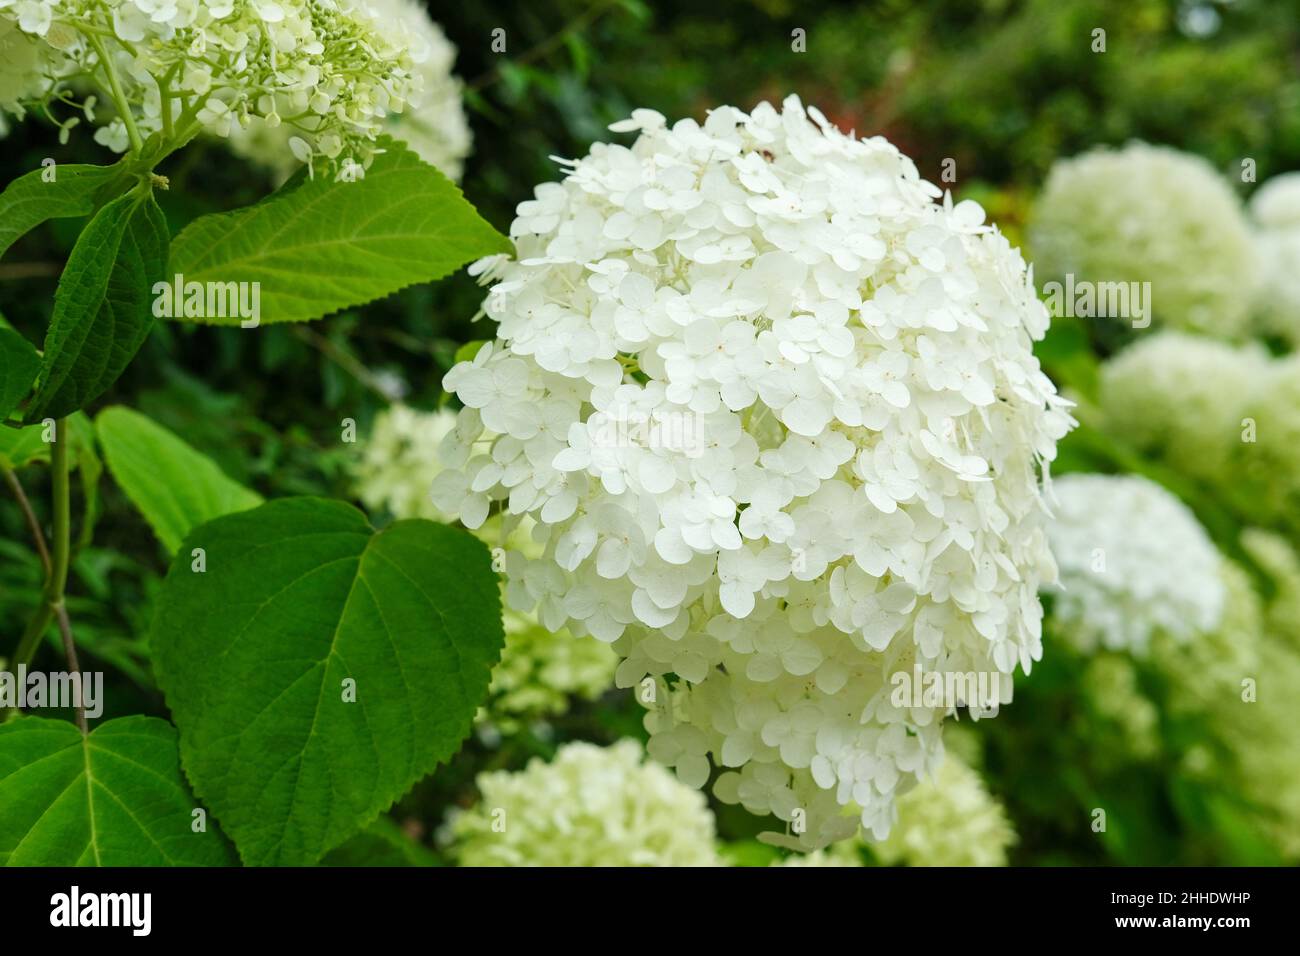 Hydrangea arborescens 'Trong Annabelle'. Hydrangea 'Abetwo', hydrangea 'Trong Annabelle'. Gruppo di fiori bianchi Foto Stock